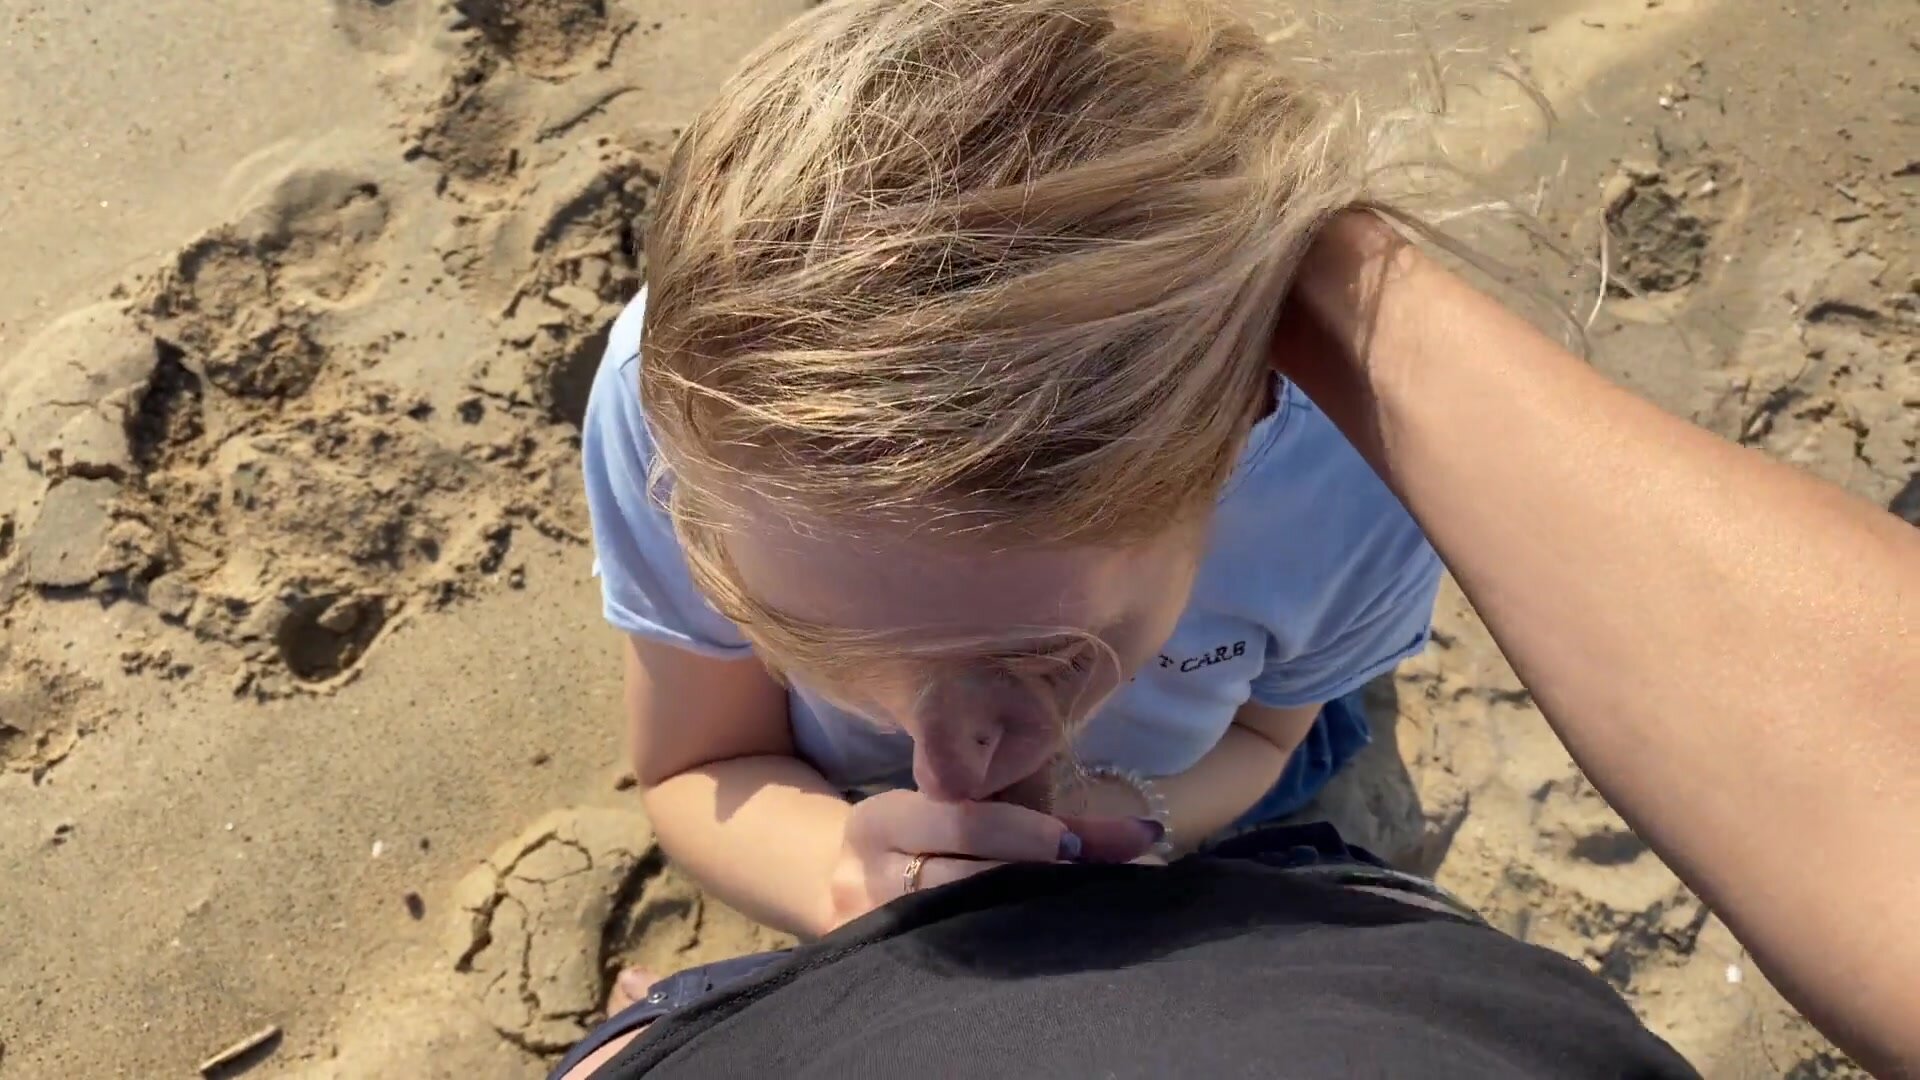 Angelic oral sex at the beach with excited blonde picture